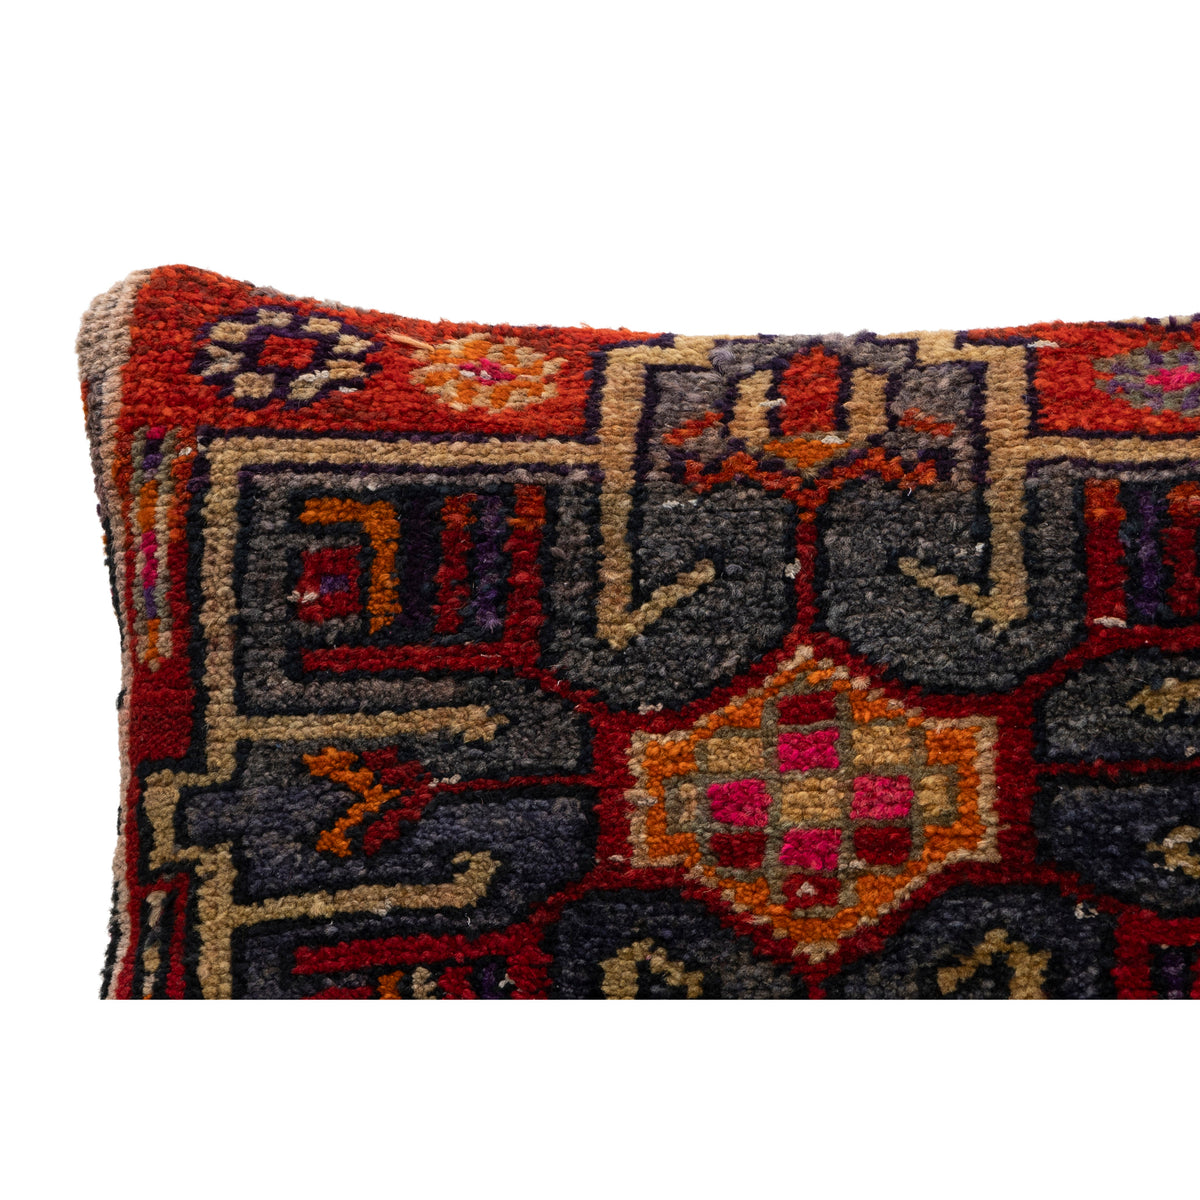 Handwoven Wool Rug Pillow Cover 16" x 24"